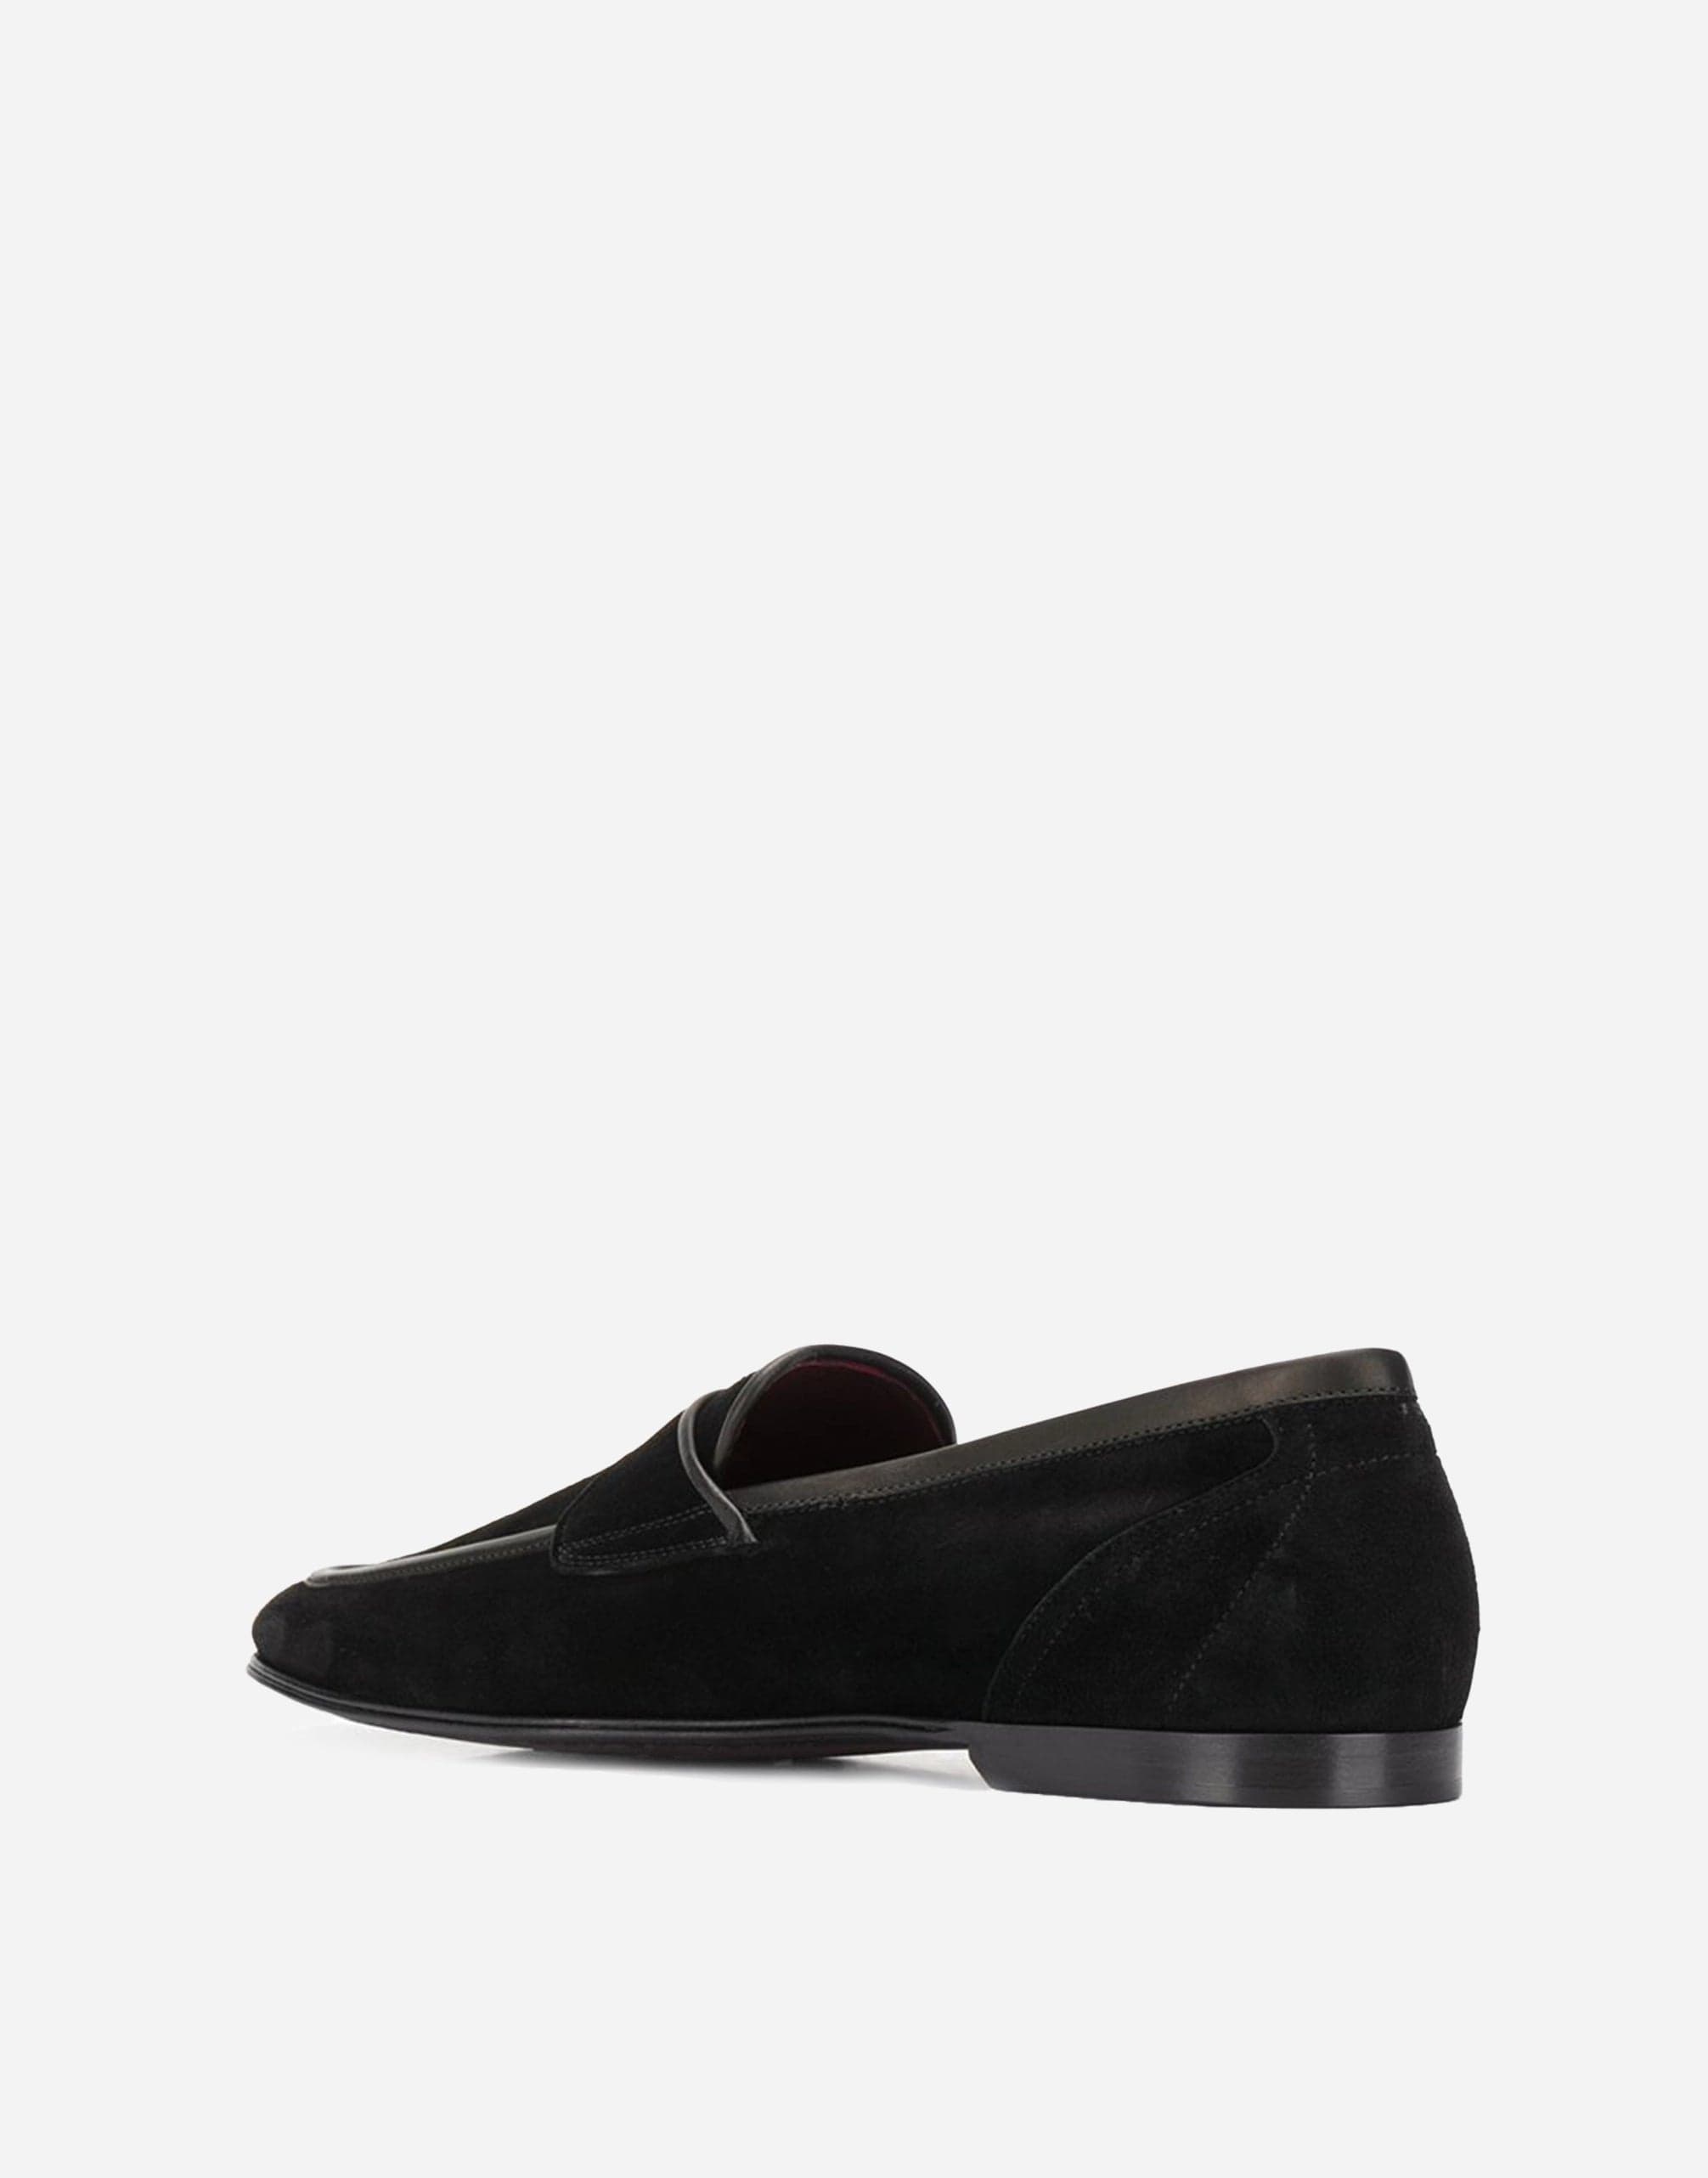 Dolce & Gabbana Contrast Trims Loafers